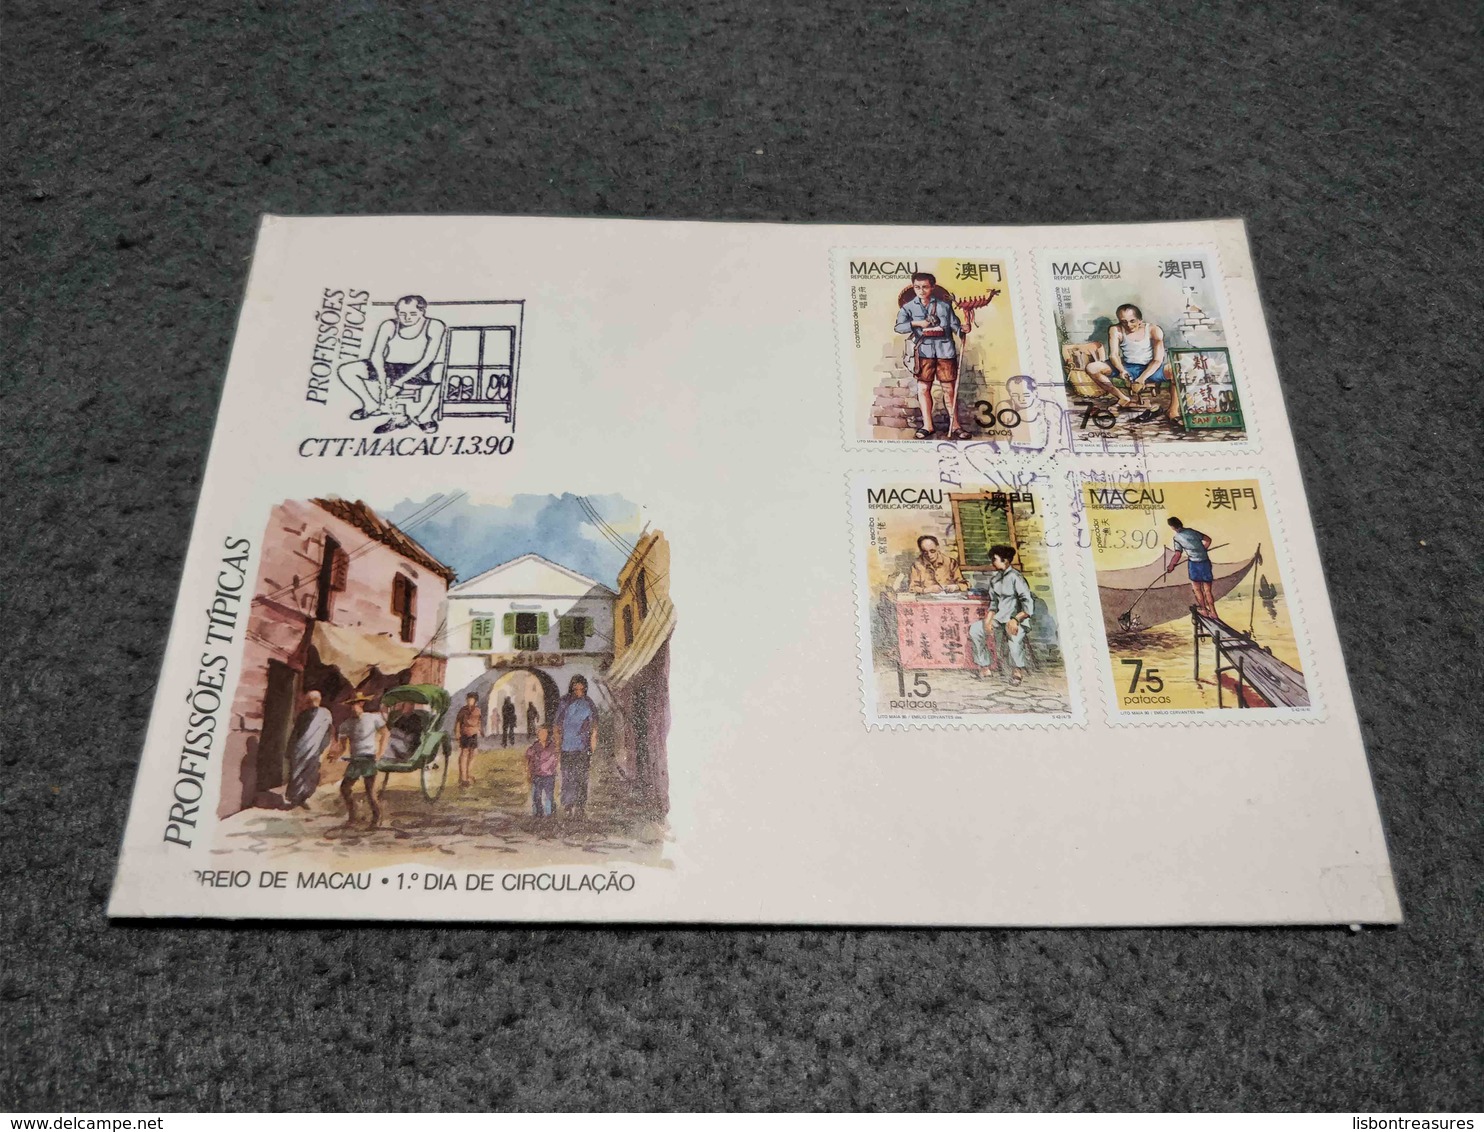 PORTUGAL CHINA MACAO FDC PROFISSOES TIPICAS 1990 - FDC